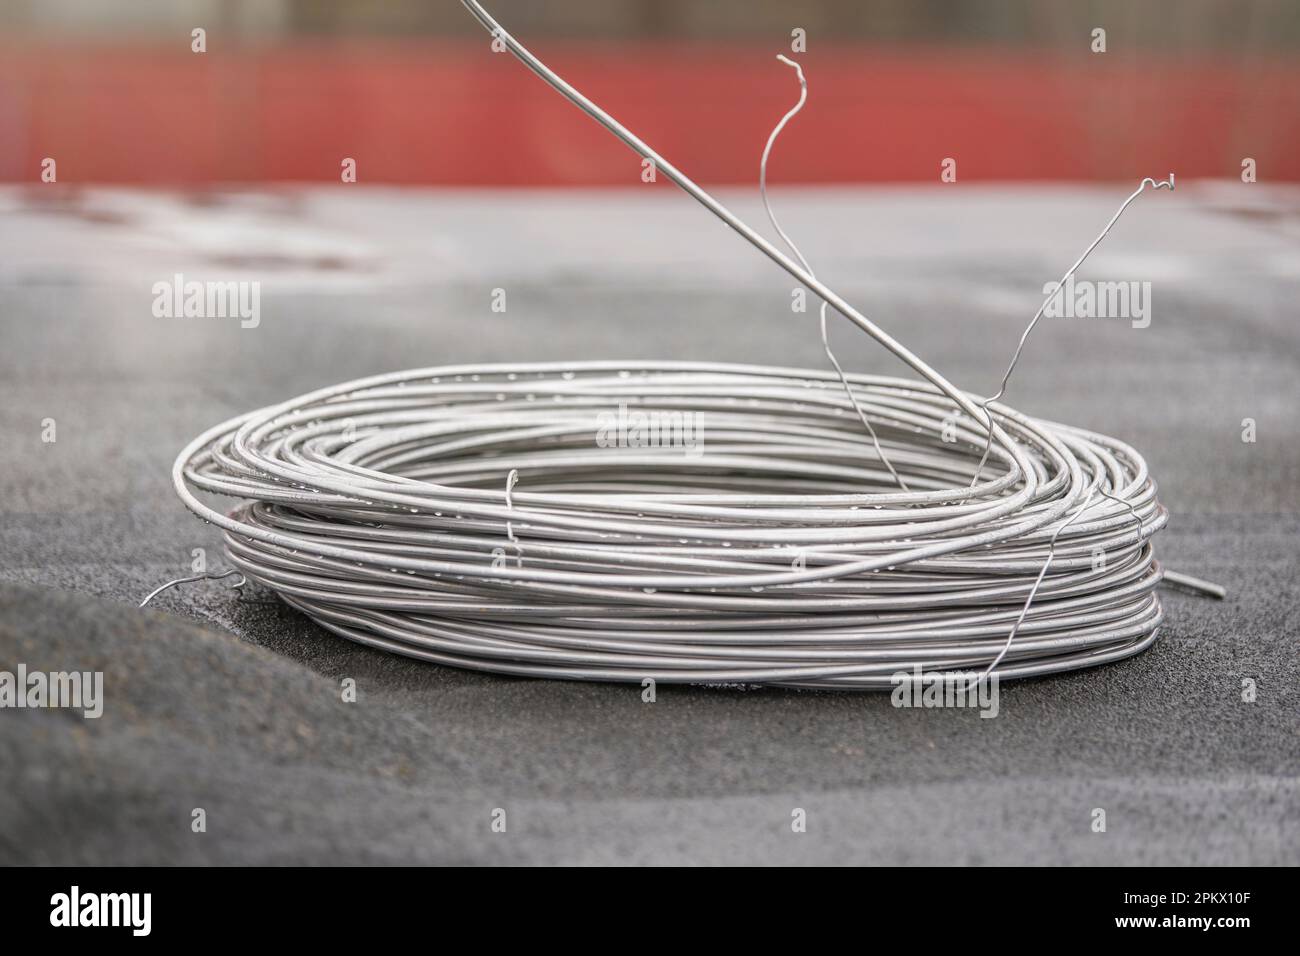 Thick aluminum wire for grounding buildings. Grounding wire to protect the building structure from short circuit. Stock Photo